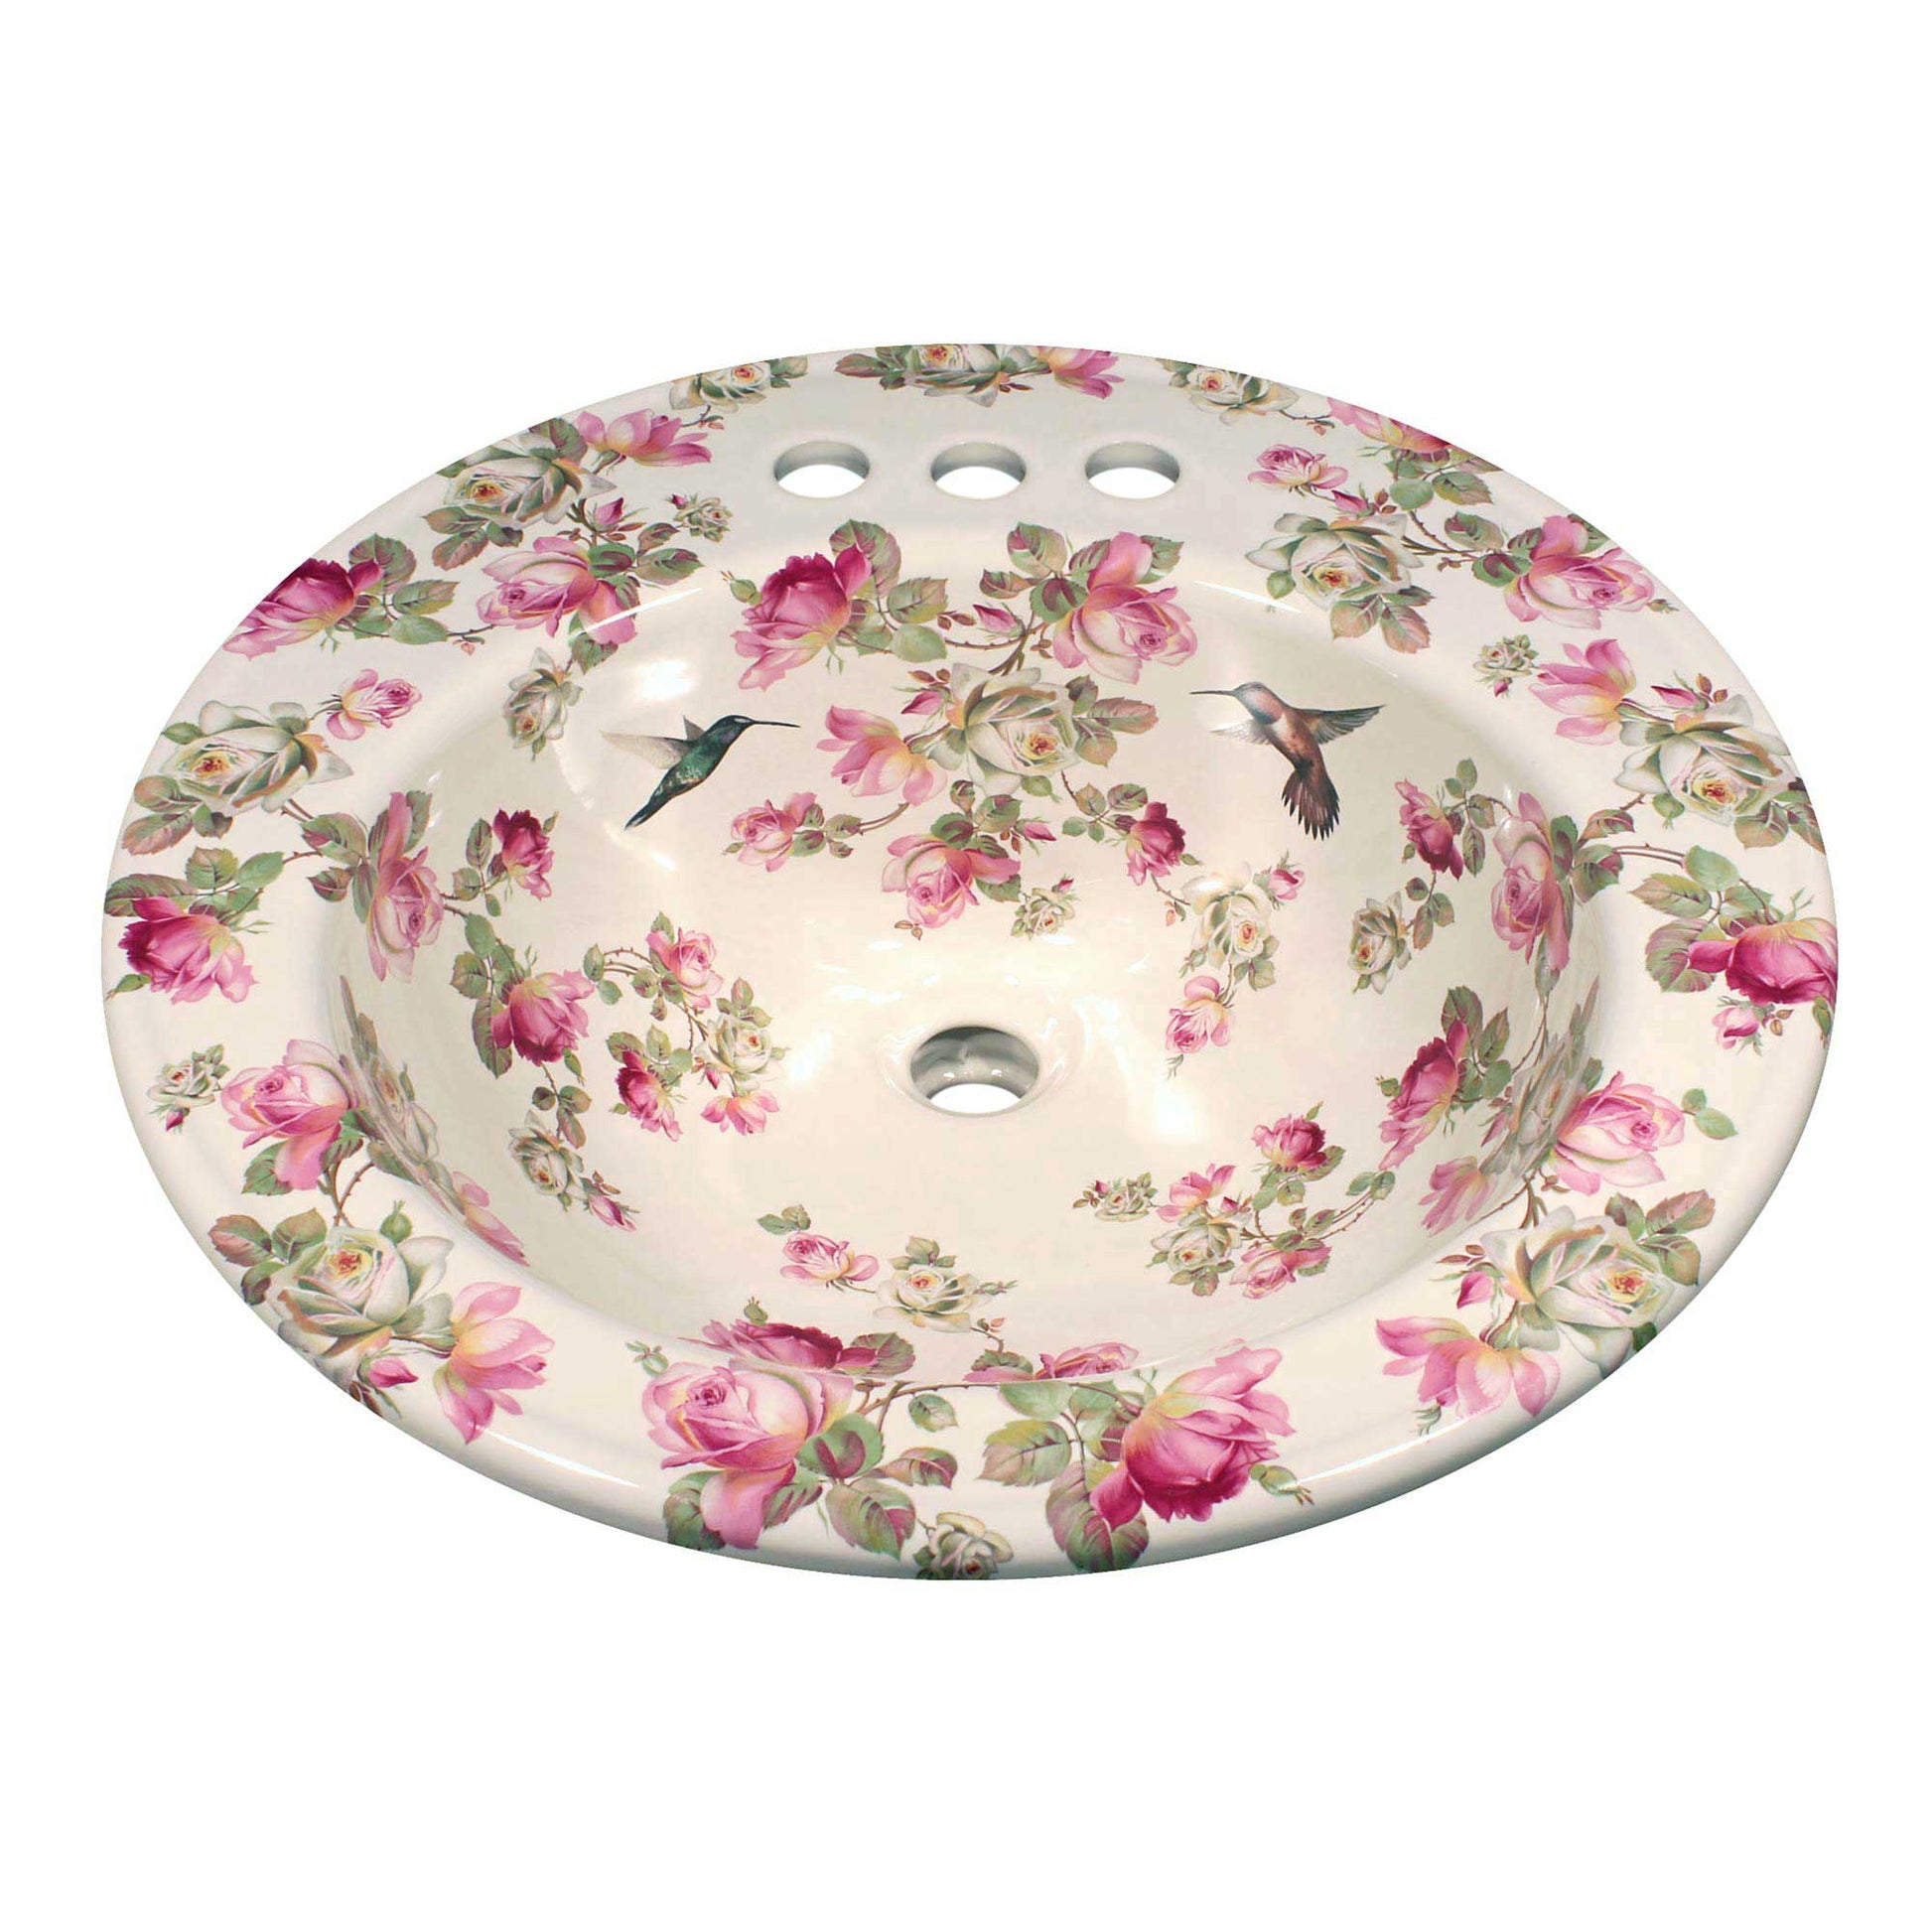 Geraldine roses in pink and white painted Kohler sink with hummingbirds